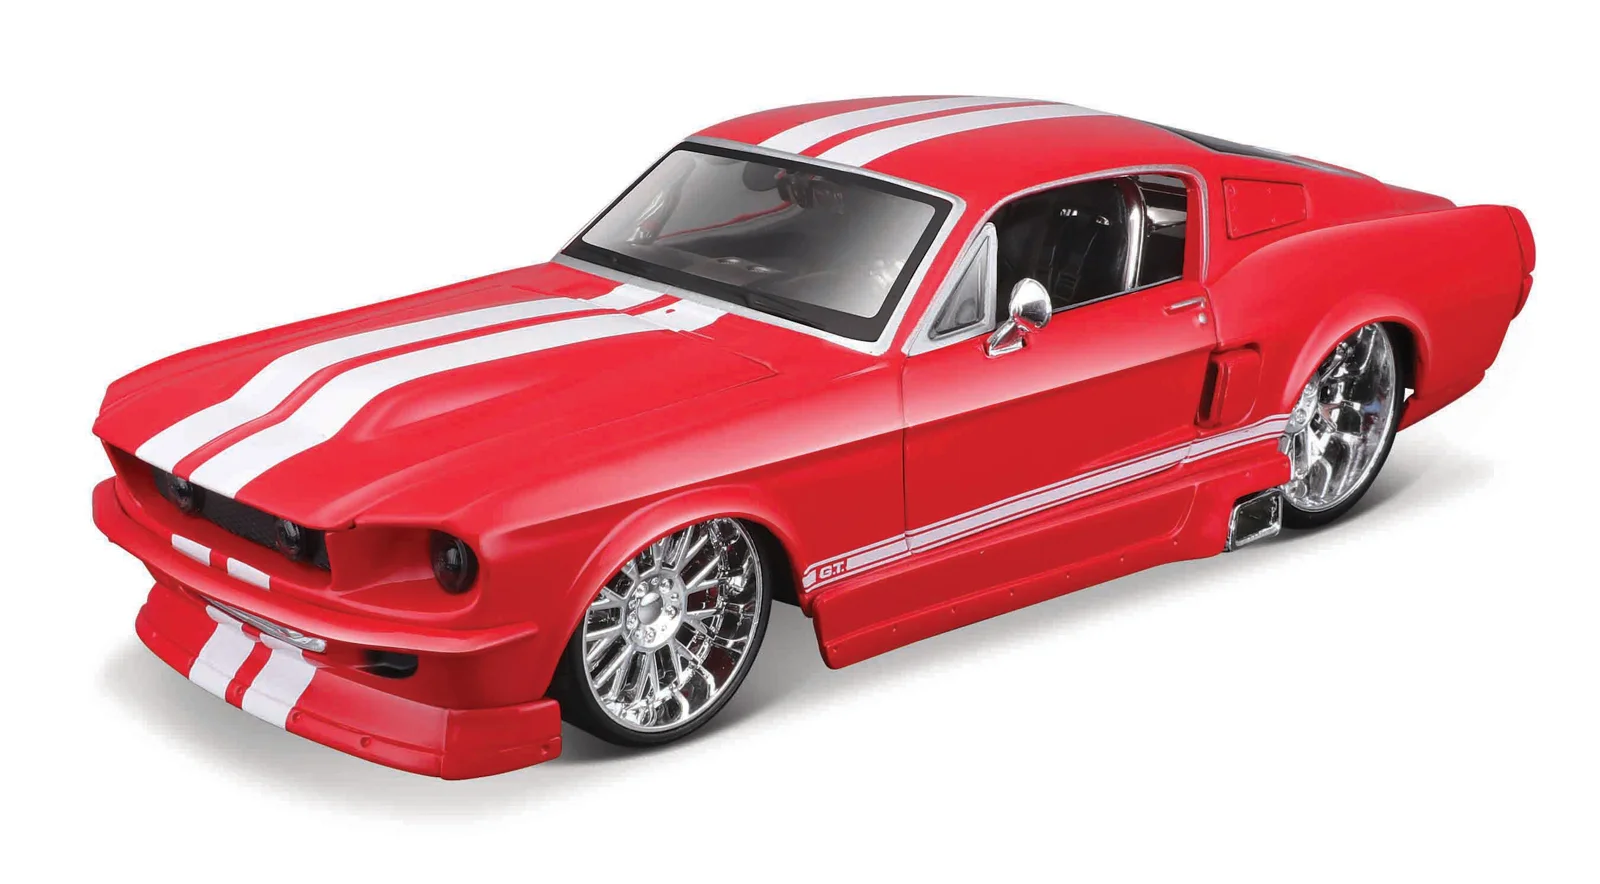 Maisto - Design Classic Muscle - 1967 Ford Mustang GT, 1:24